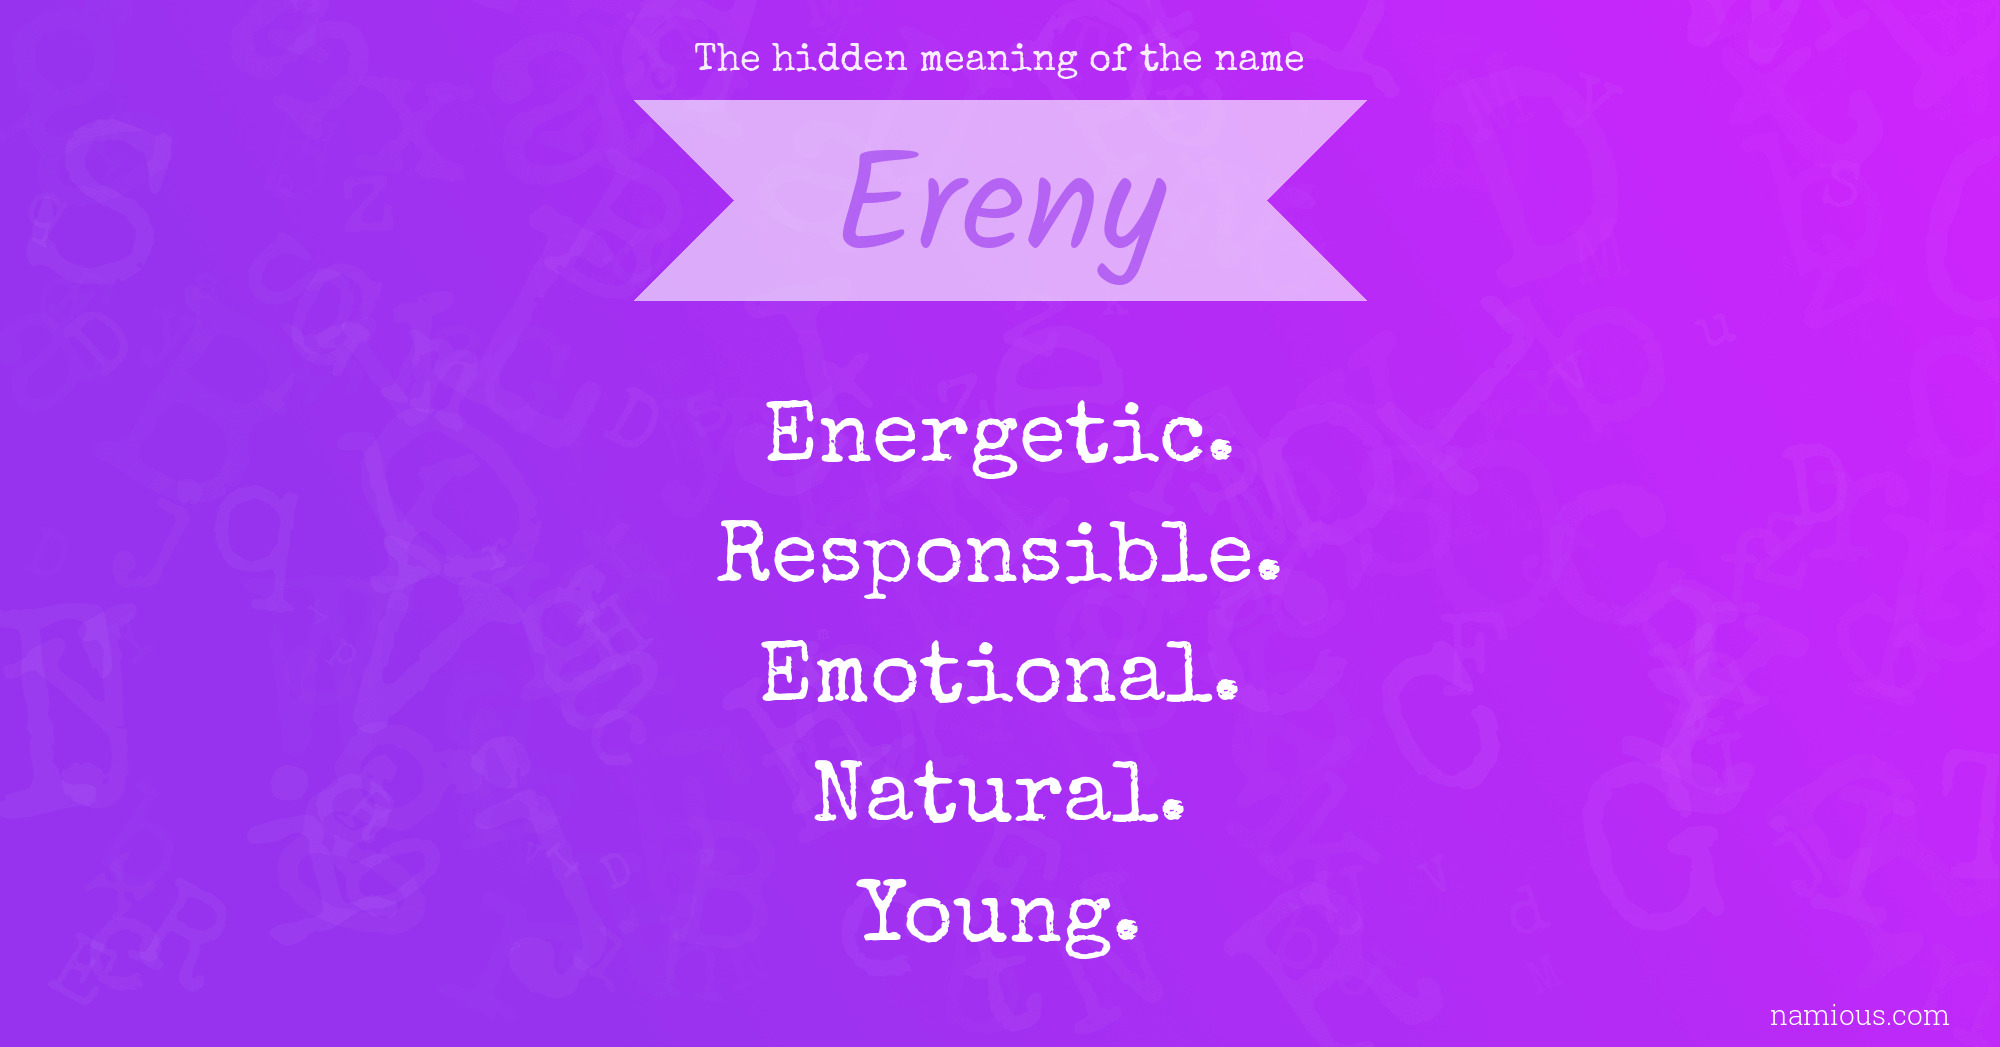 The hidden meaning of the name Ereny